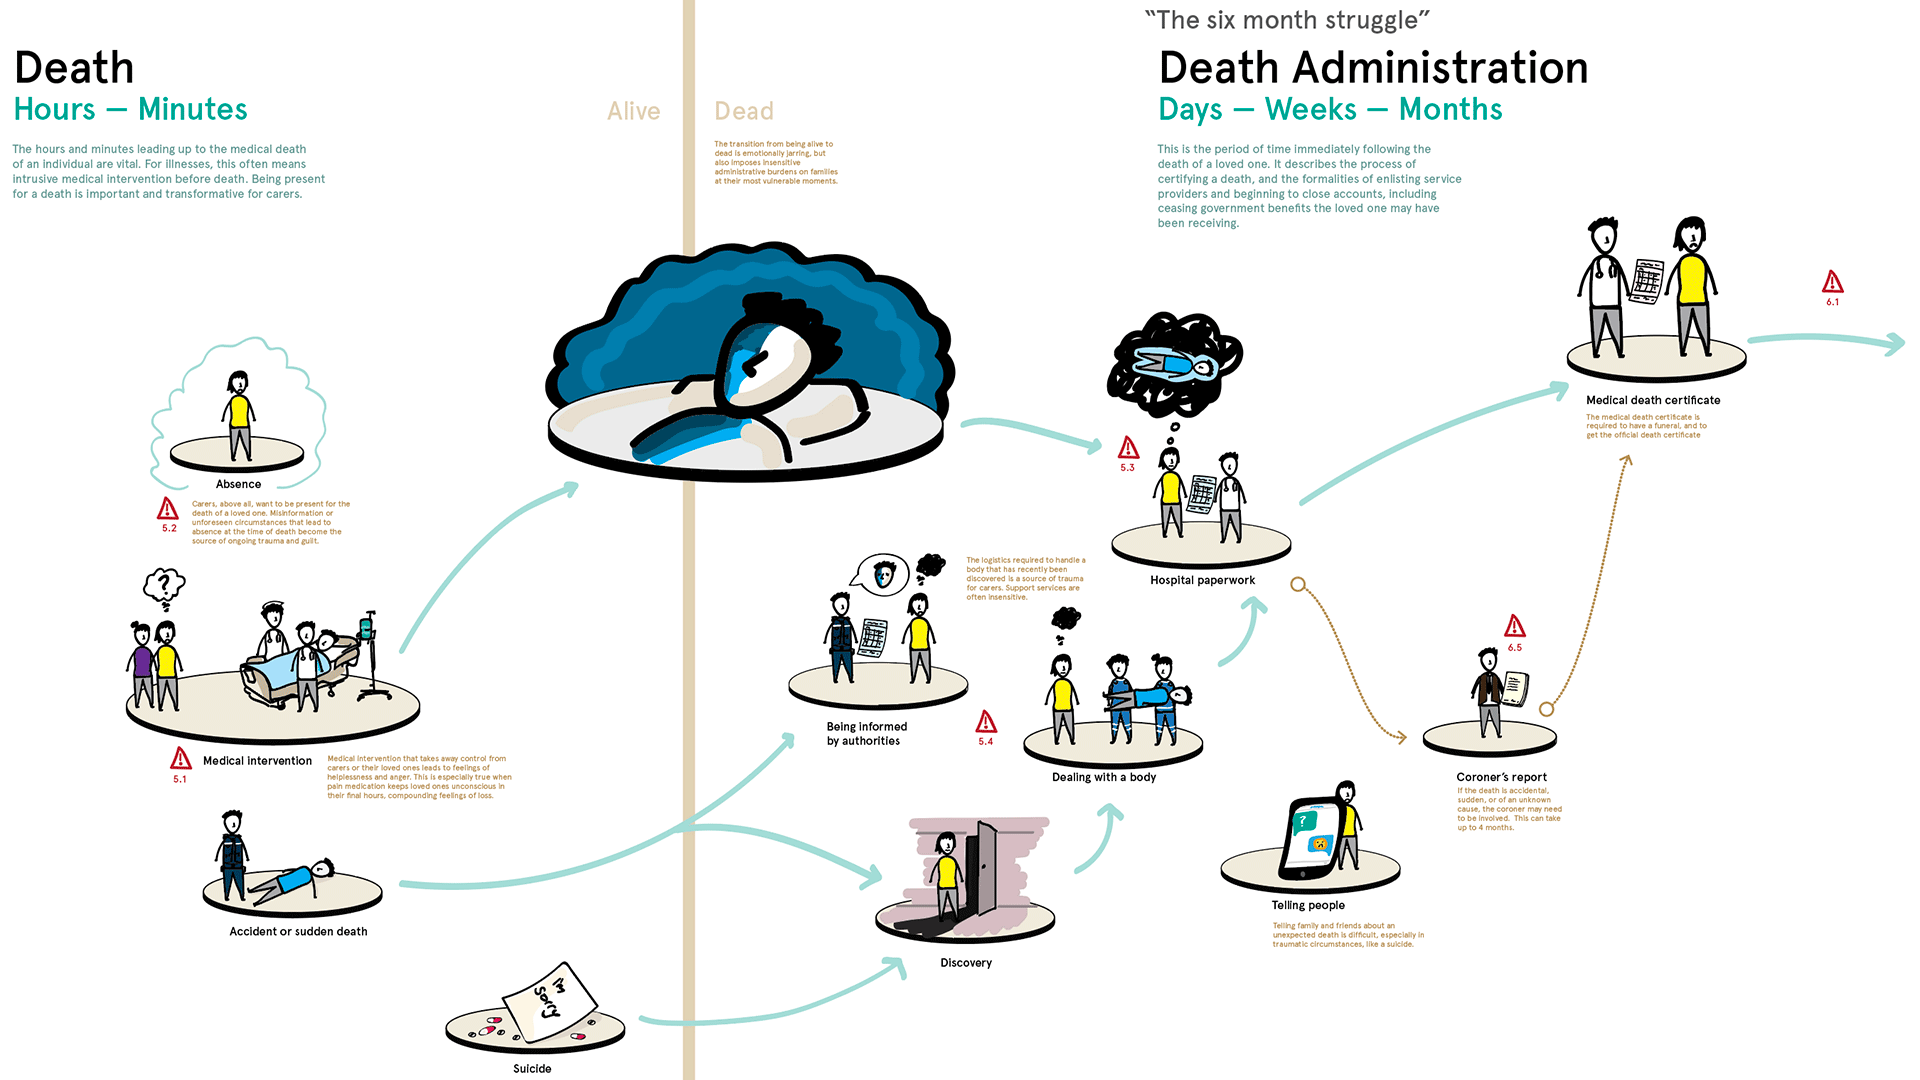 A visual representation of what happens at the time of death and the 'six month struggle' thereafter. The visual includes illustrations and captions. It steps through key moments such as how the death occurred, being informed of the death, dealing with the body and completing hospital paperwork, to name a few. 